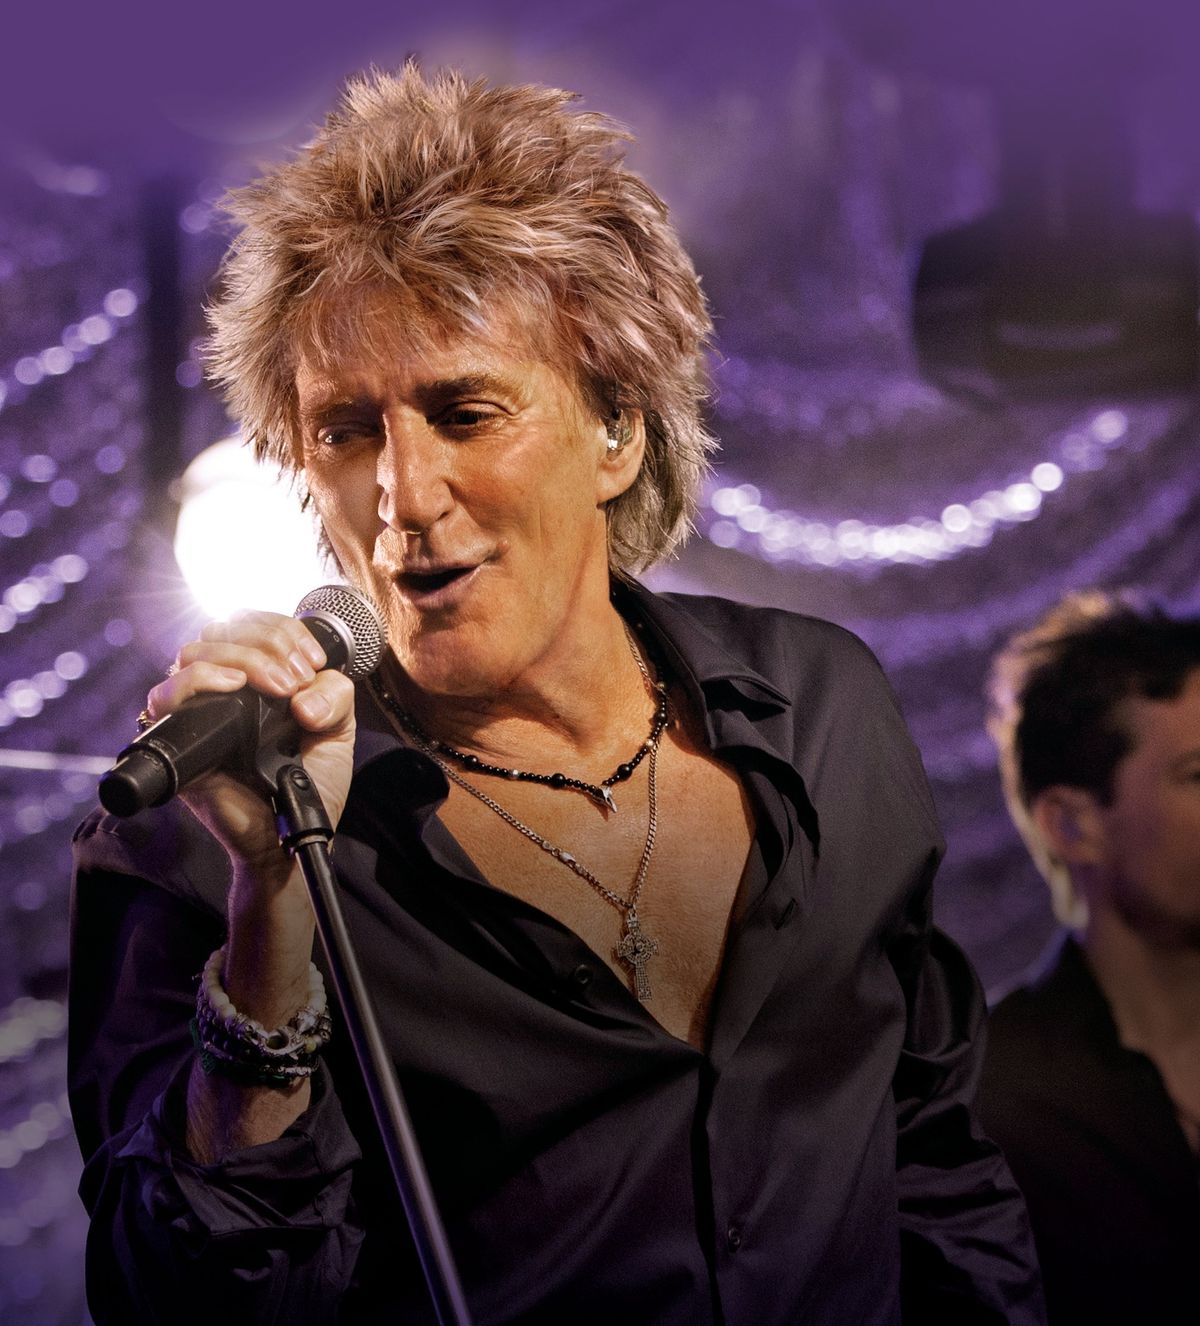 Rod Stewart: Live in Concert - One Last Time